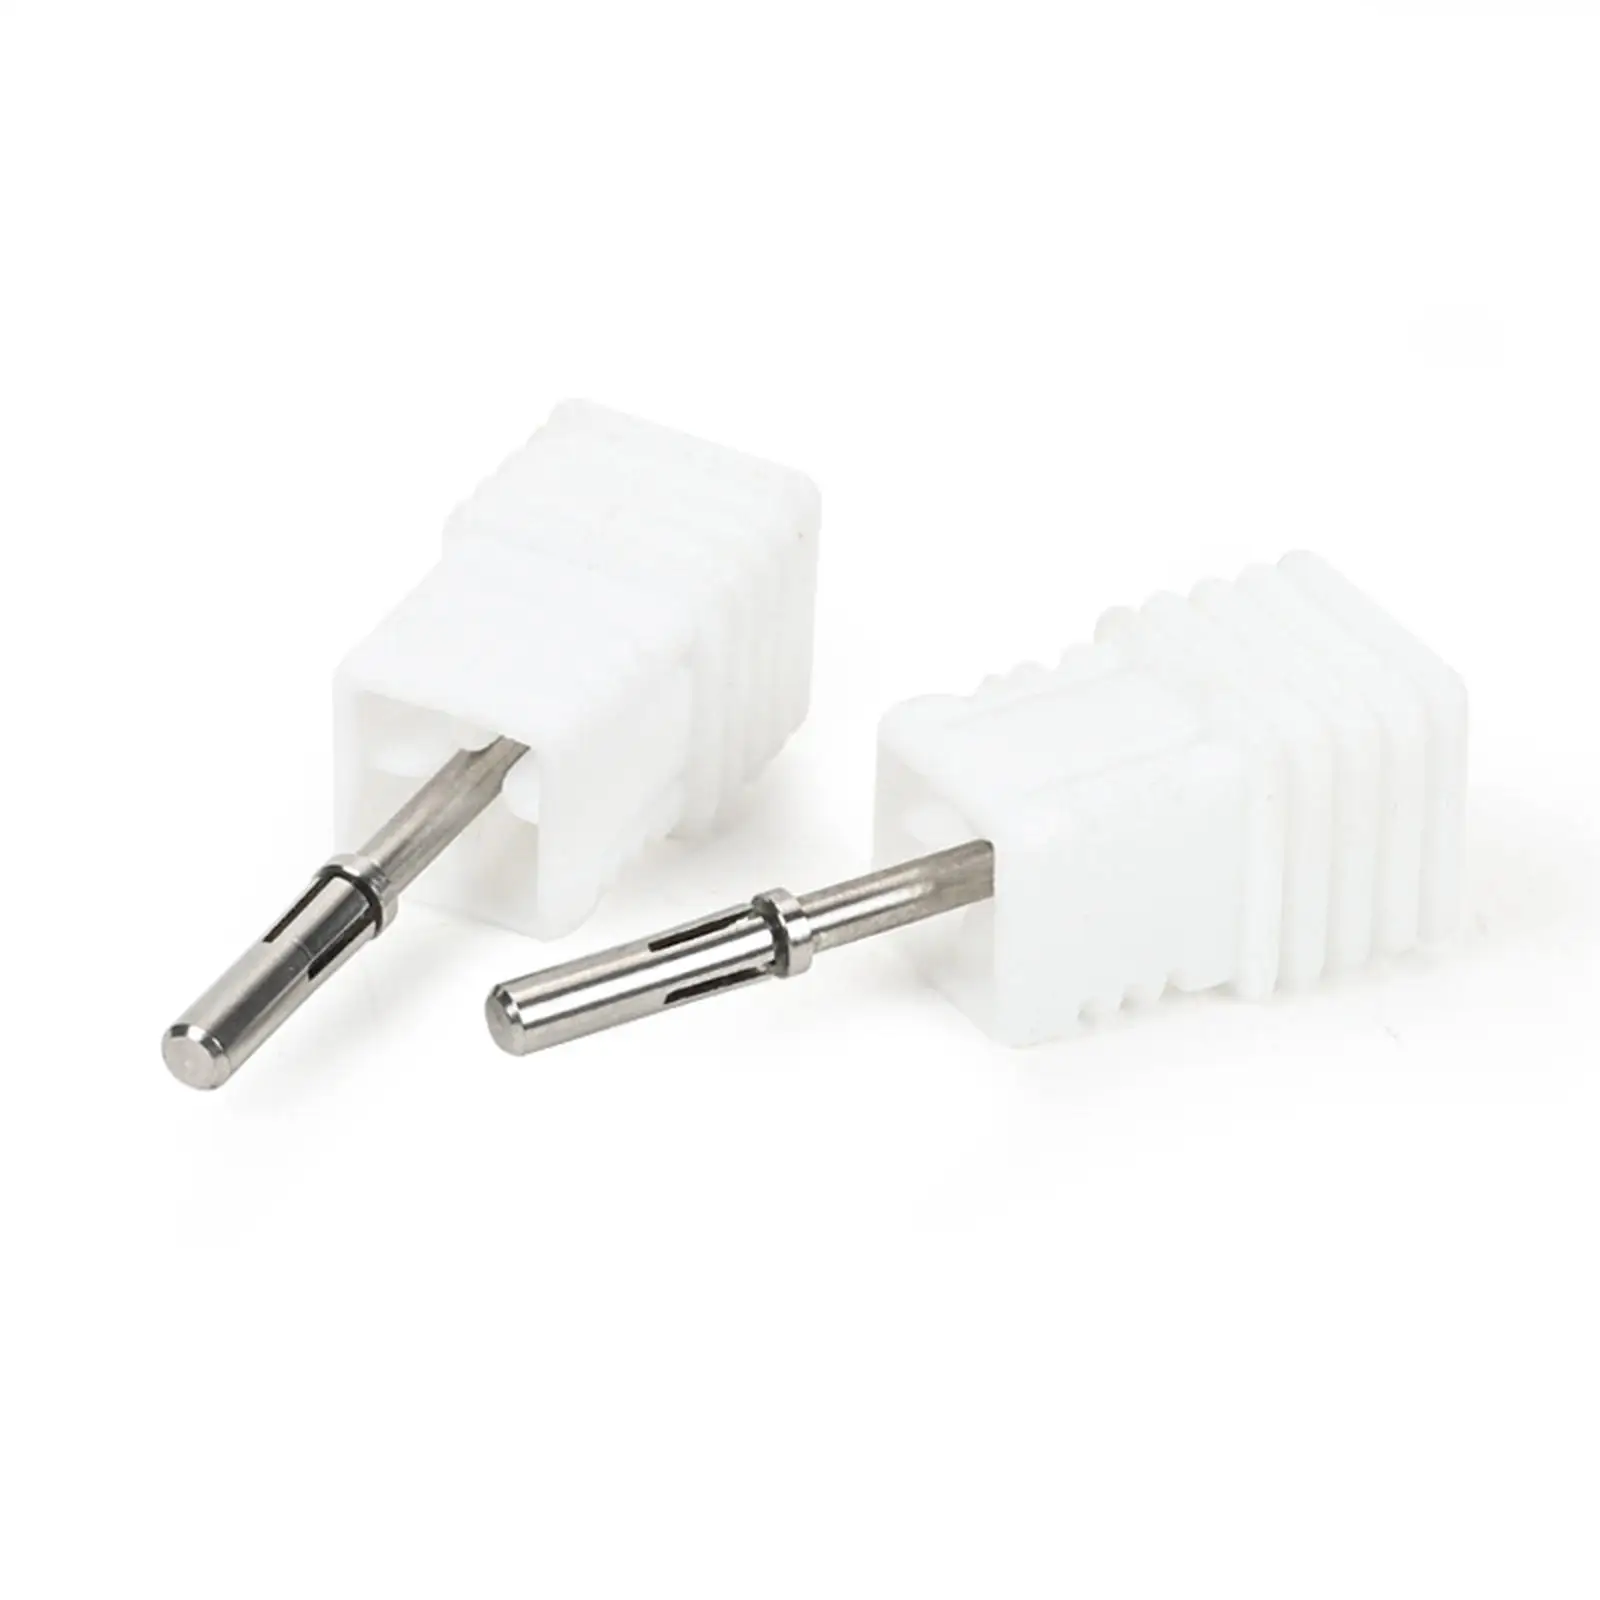 3.1mm Nail Sanding Bands Mandrel /Nail Drill Heads/ Stainless Steel/ Nail Sanders Drill for Electric File /Home Salon /